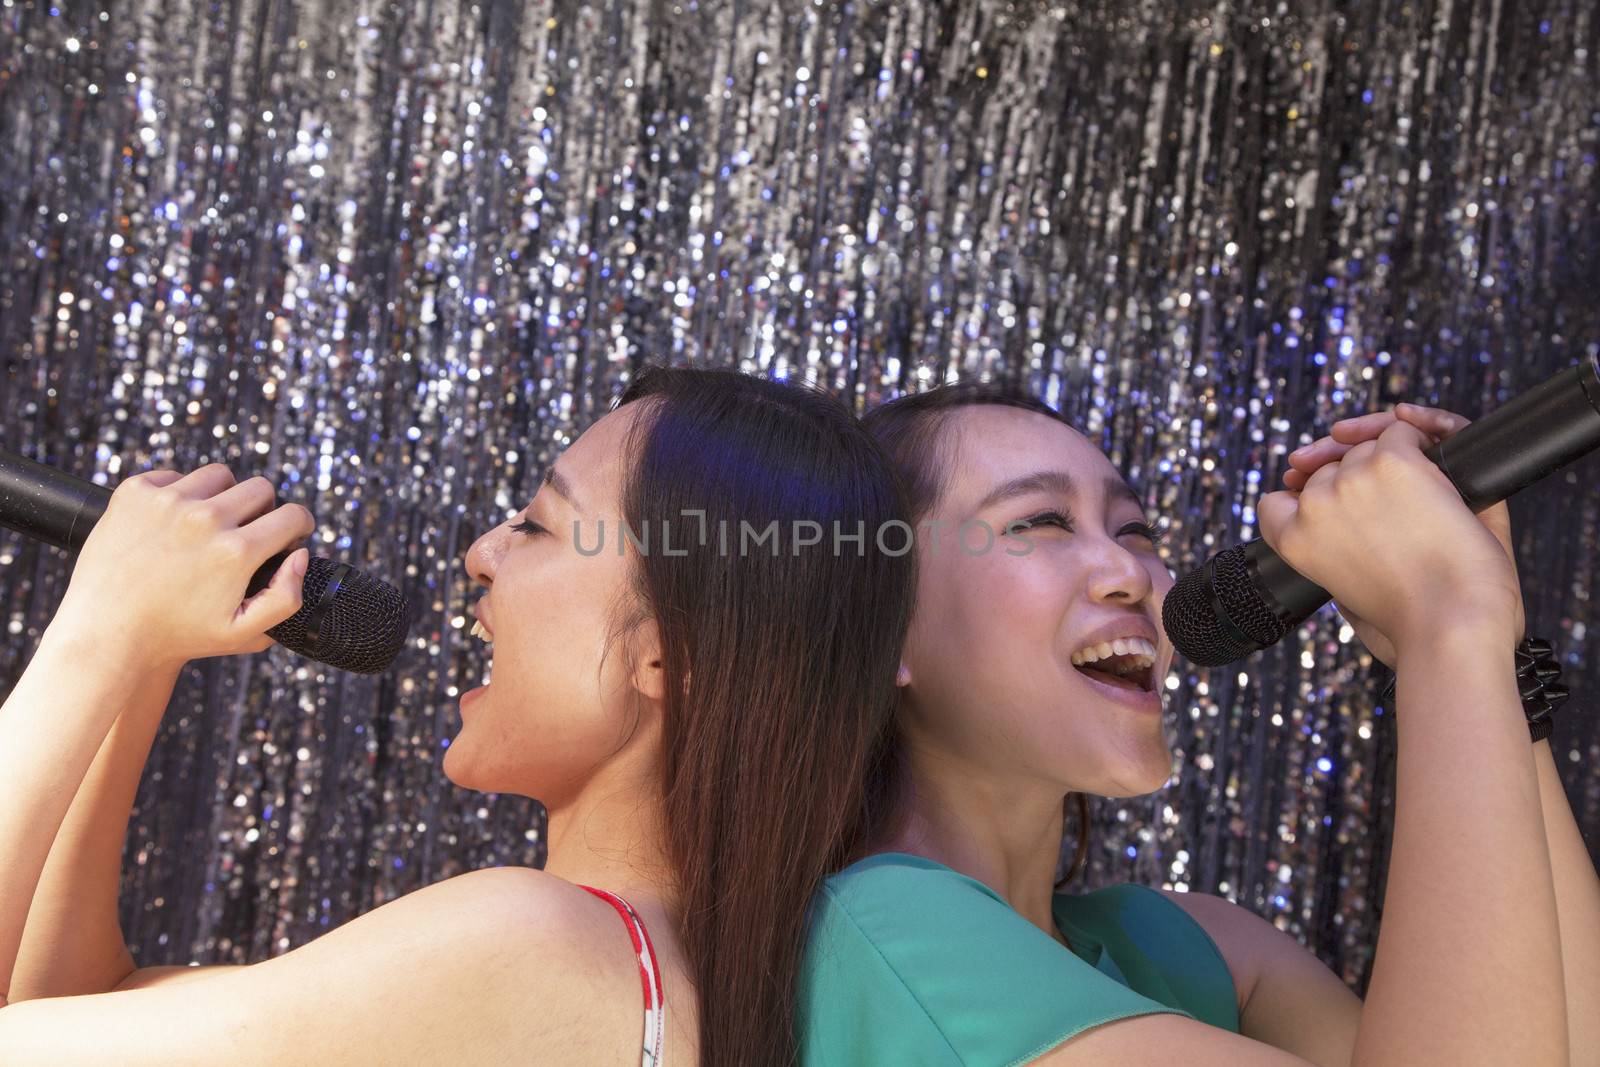 Two friends back to back holding microphones and singing together at karaoke